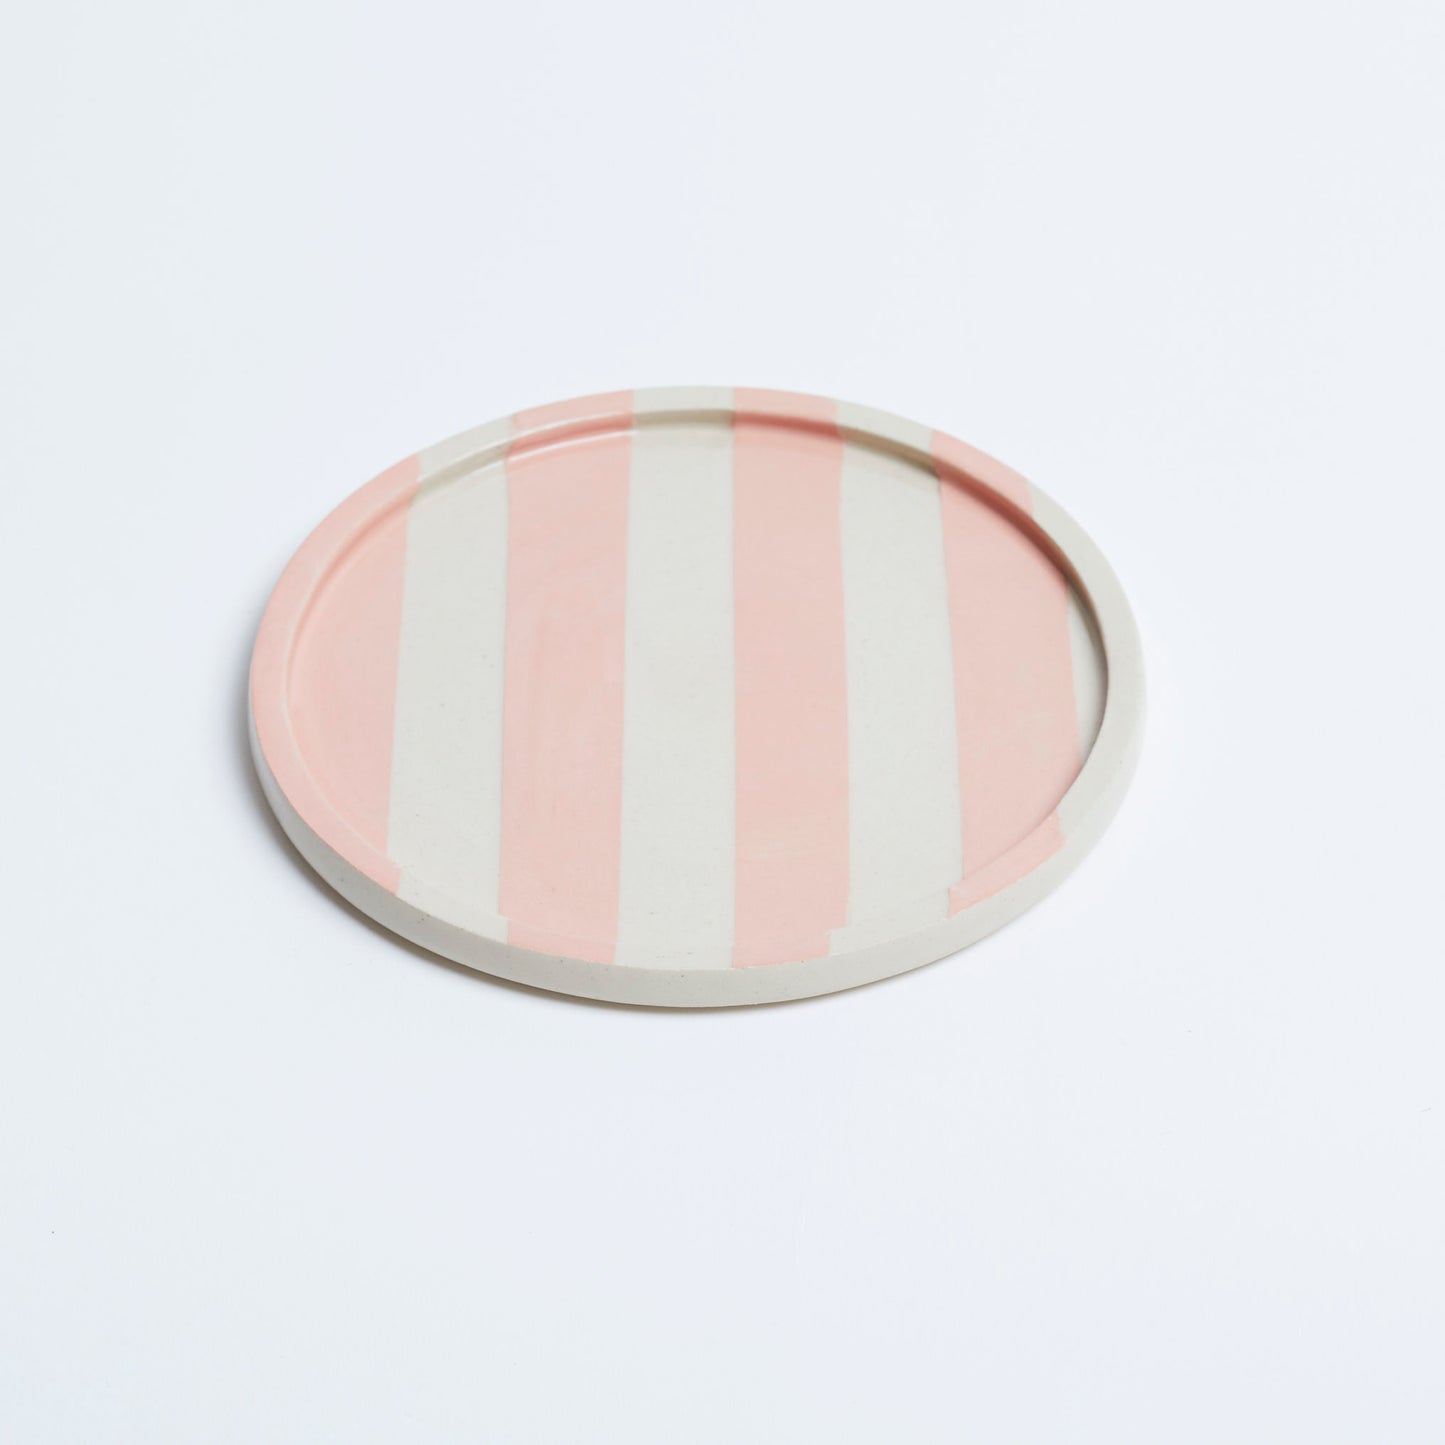 Duci Striped Plate Pink 15cm